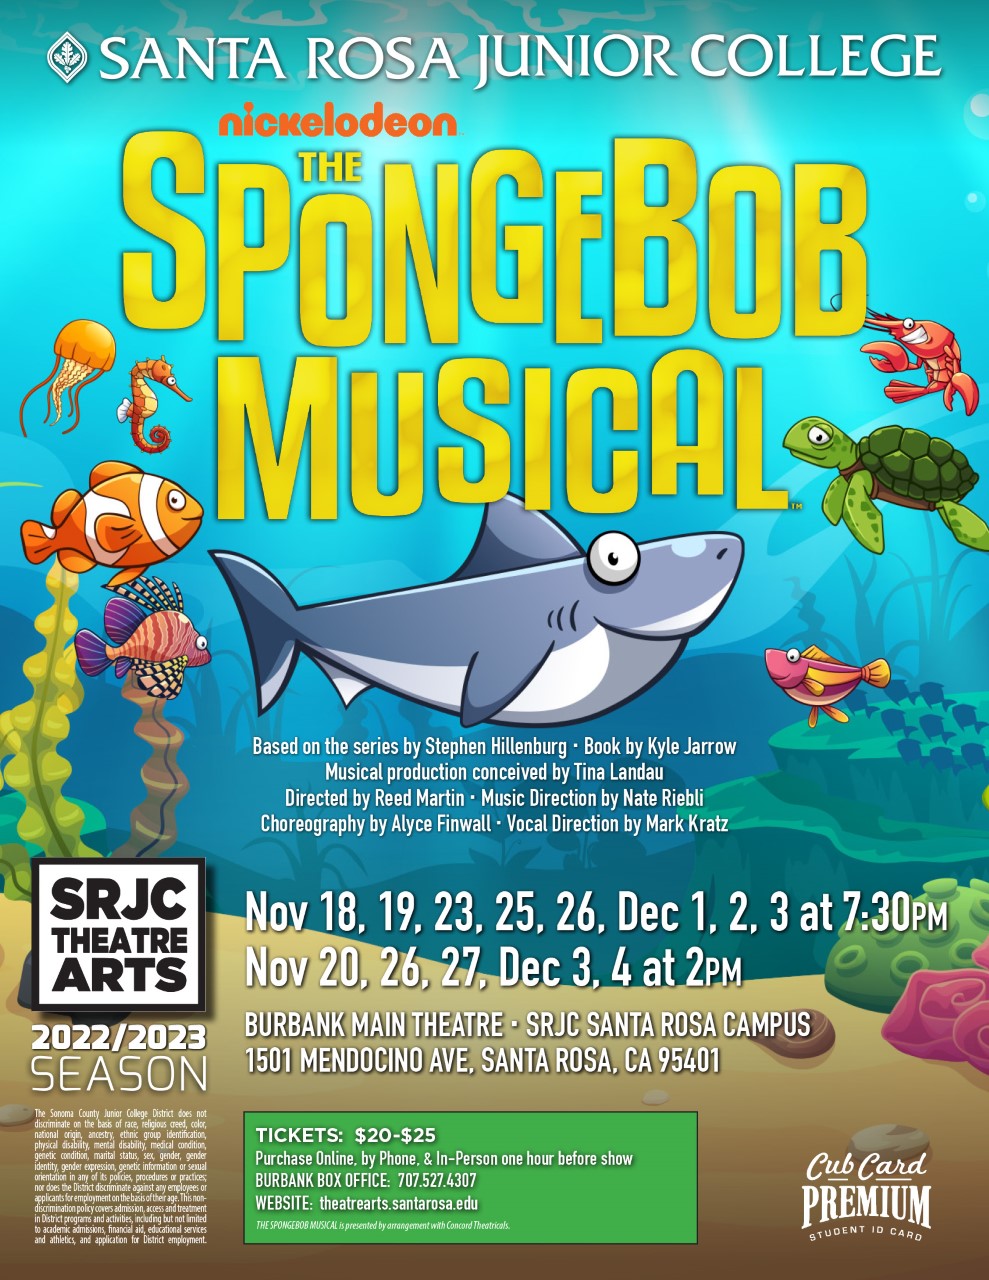 THE SPONGEBOB MUSICAL Based on the series by Stephen Hillenburg. Book by Kyle Jarrow. Musical production conceived by Tina Landau.  Directed by Reed Martin. Music Direction by Nate Riebli. Choreography by Alyce Finwall. Vocal Direction by Mark Kratz.  7:30 pm on Nov 18, 19, 23, 25, 26, Dec 1, 2, 3, 2022 2:00 pm on Nov 20, 26, 27, Dec 3, 4, 2022  Burbank Main Theatre  Adapted from the iconic Nickelodeon series! SpongeBob, Patrick, Sandy, Squidward and all of Bikini Bottom face total annihilation—until a most unexpected hero rises to take center stage. With its dazzling costumes, spectacular production numbers and cheeky humor, this delightful undersea musical is sure to appeal to all ages.